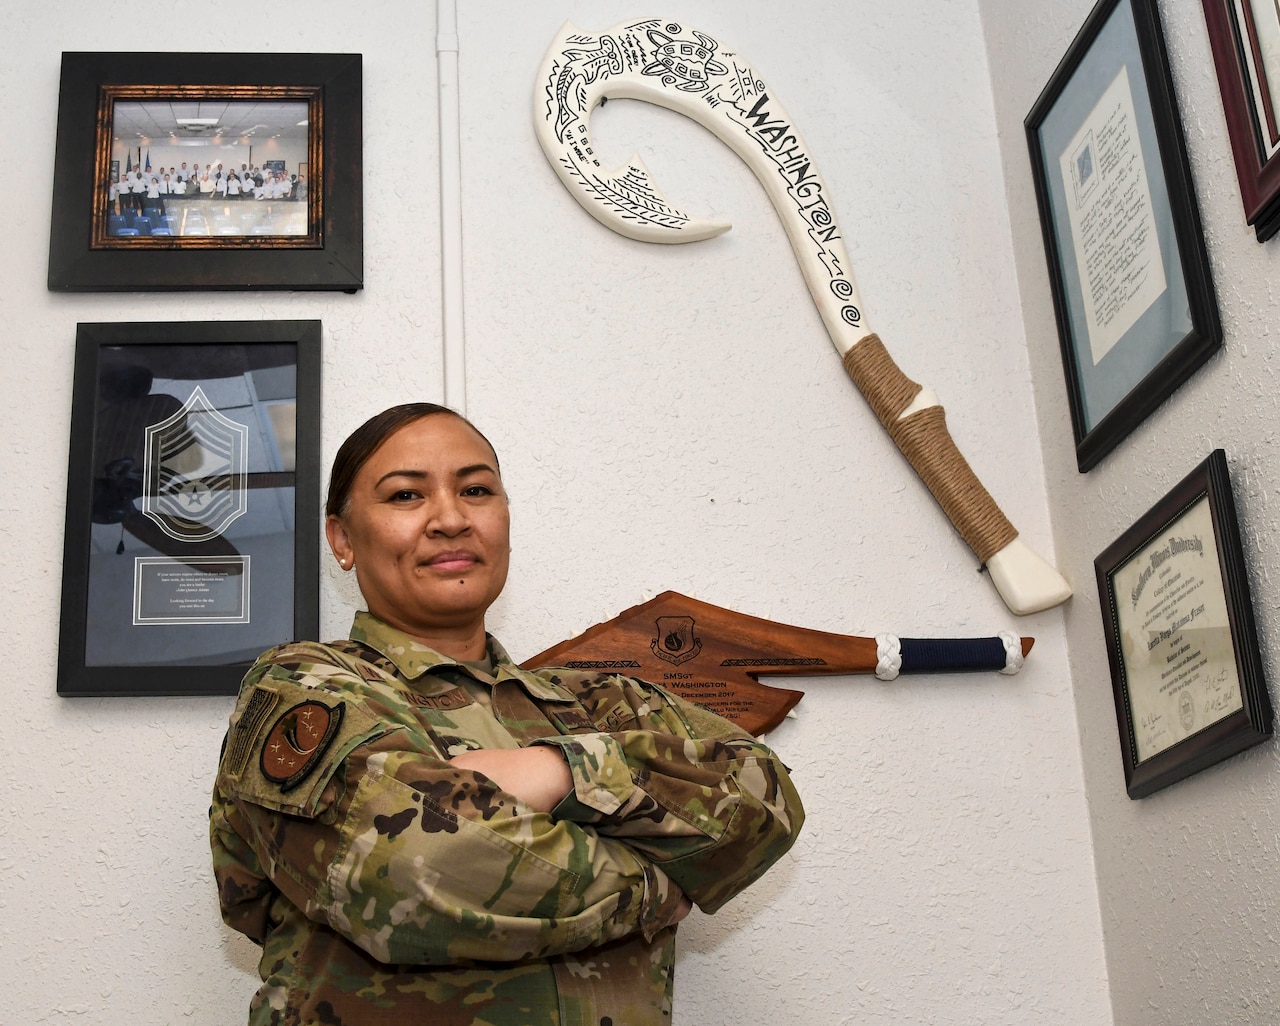 An airman stands for a photo in a room with framed items hanging on a wall.